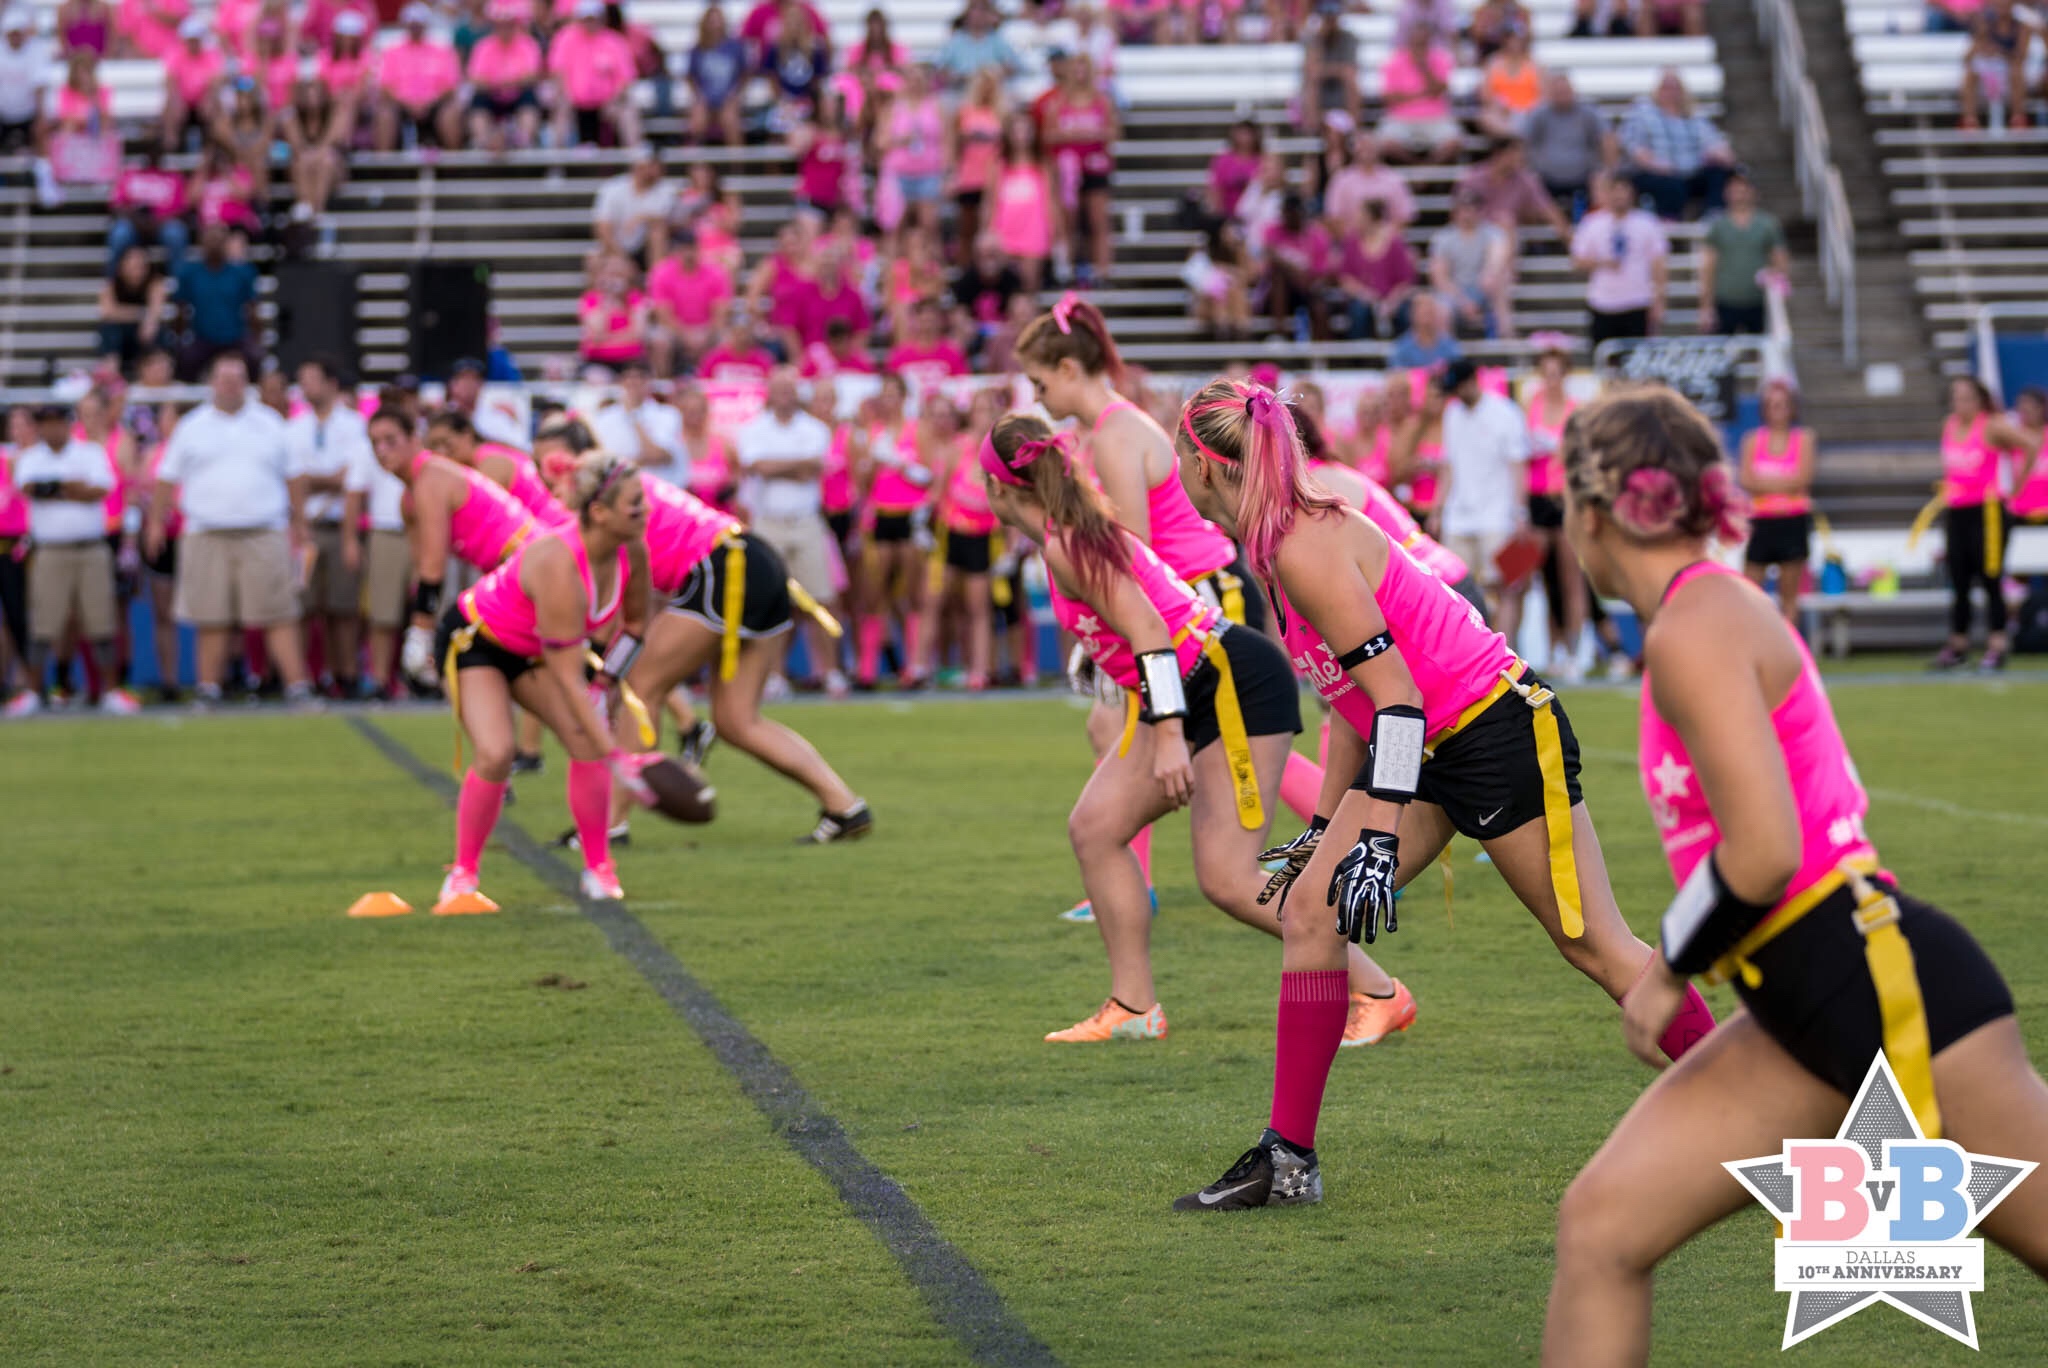 a group of women in pink shirts on a field with a crowd